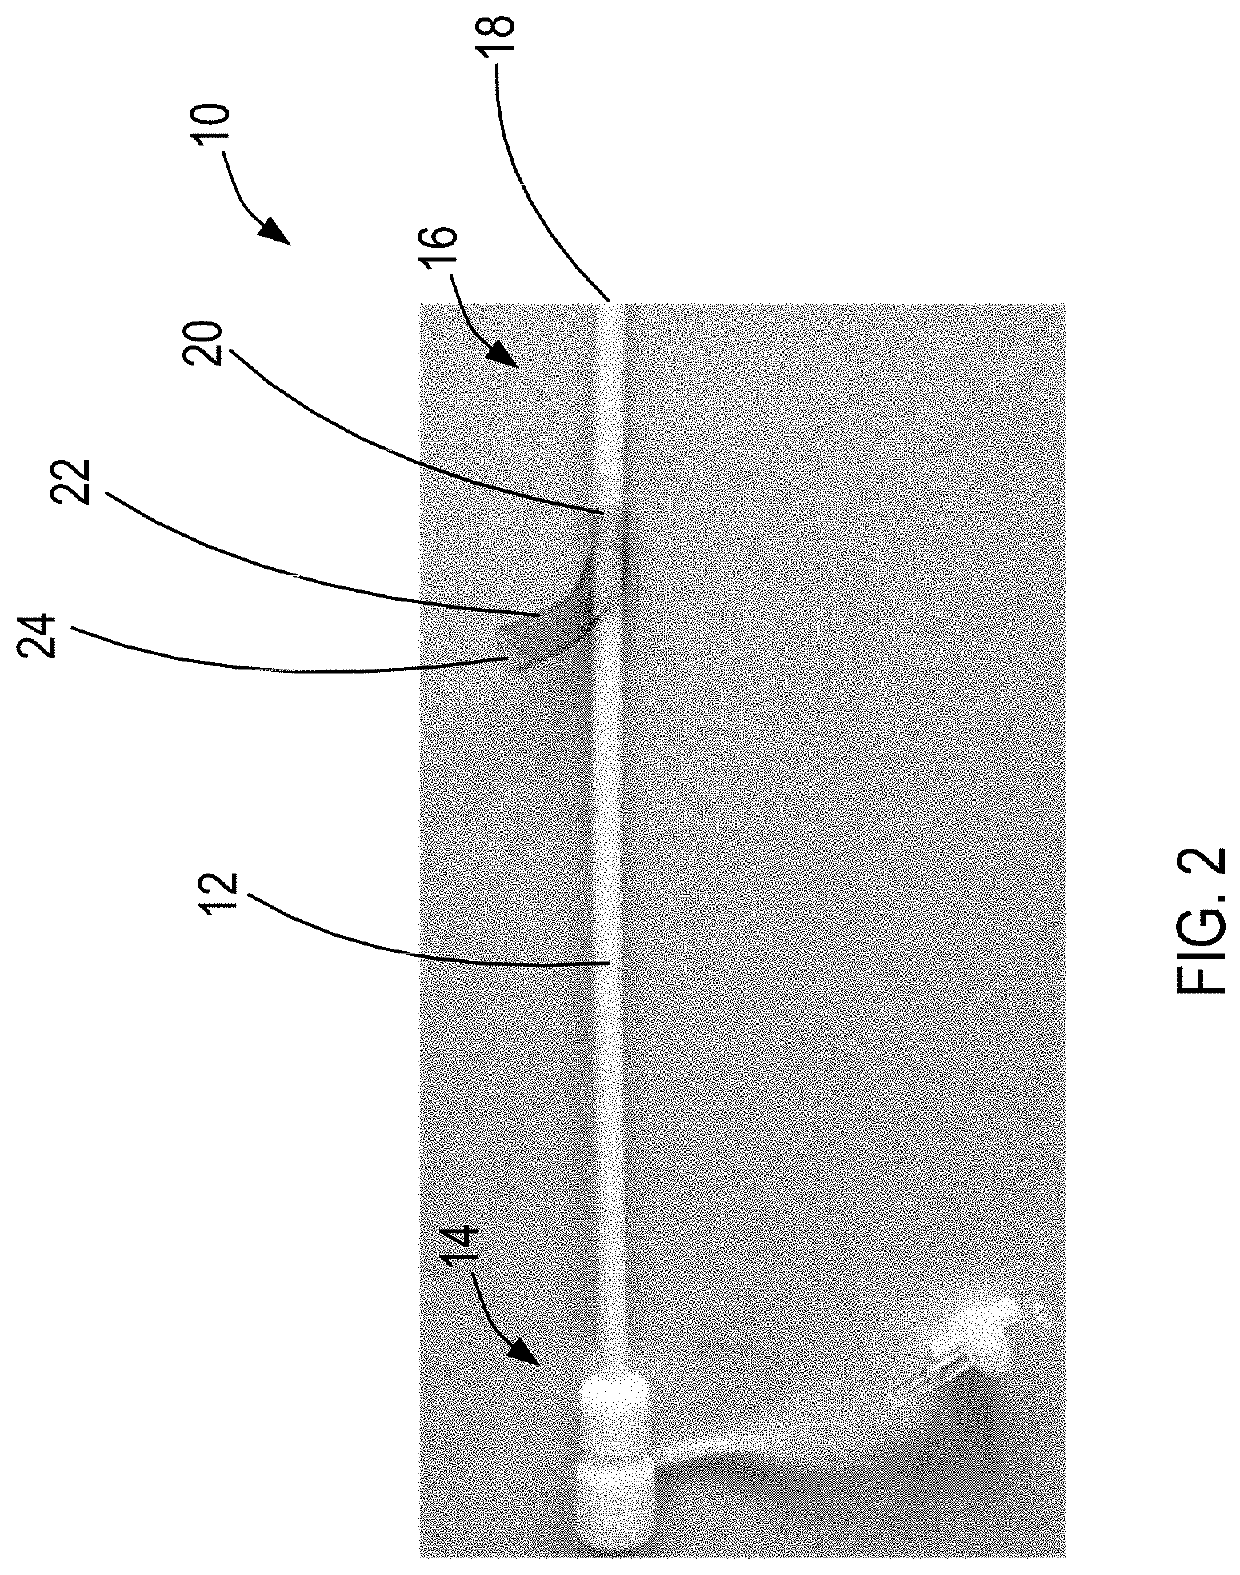 Systems and methods for diverting blood flow in blood vessels